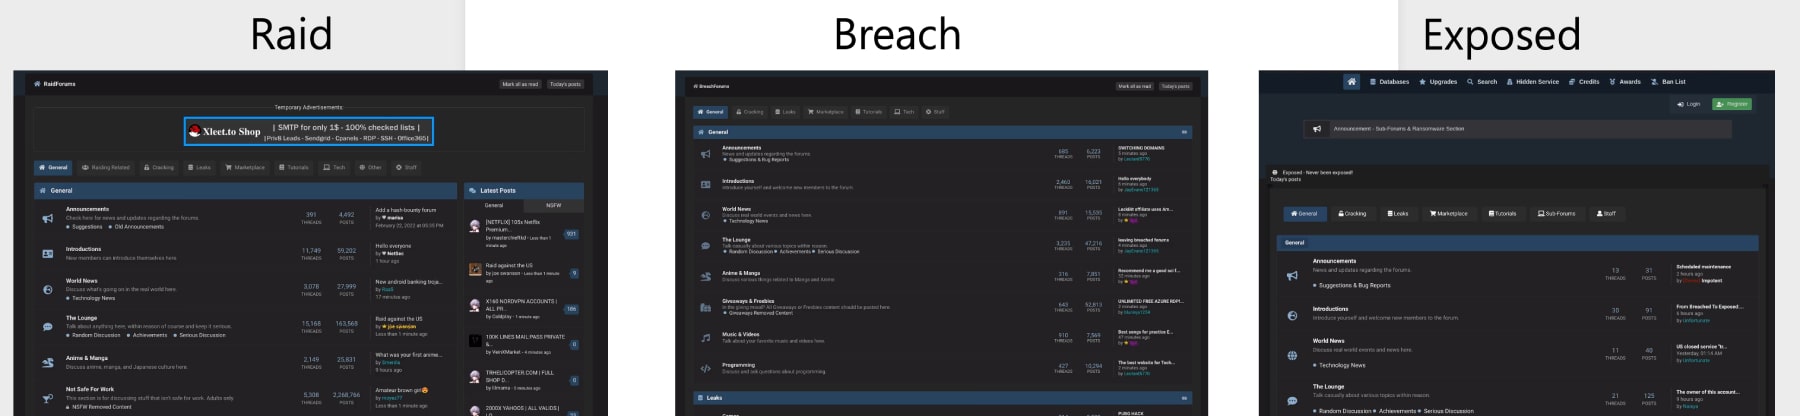 Raid, Breach, and Exposed Forums.